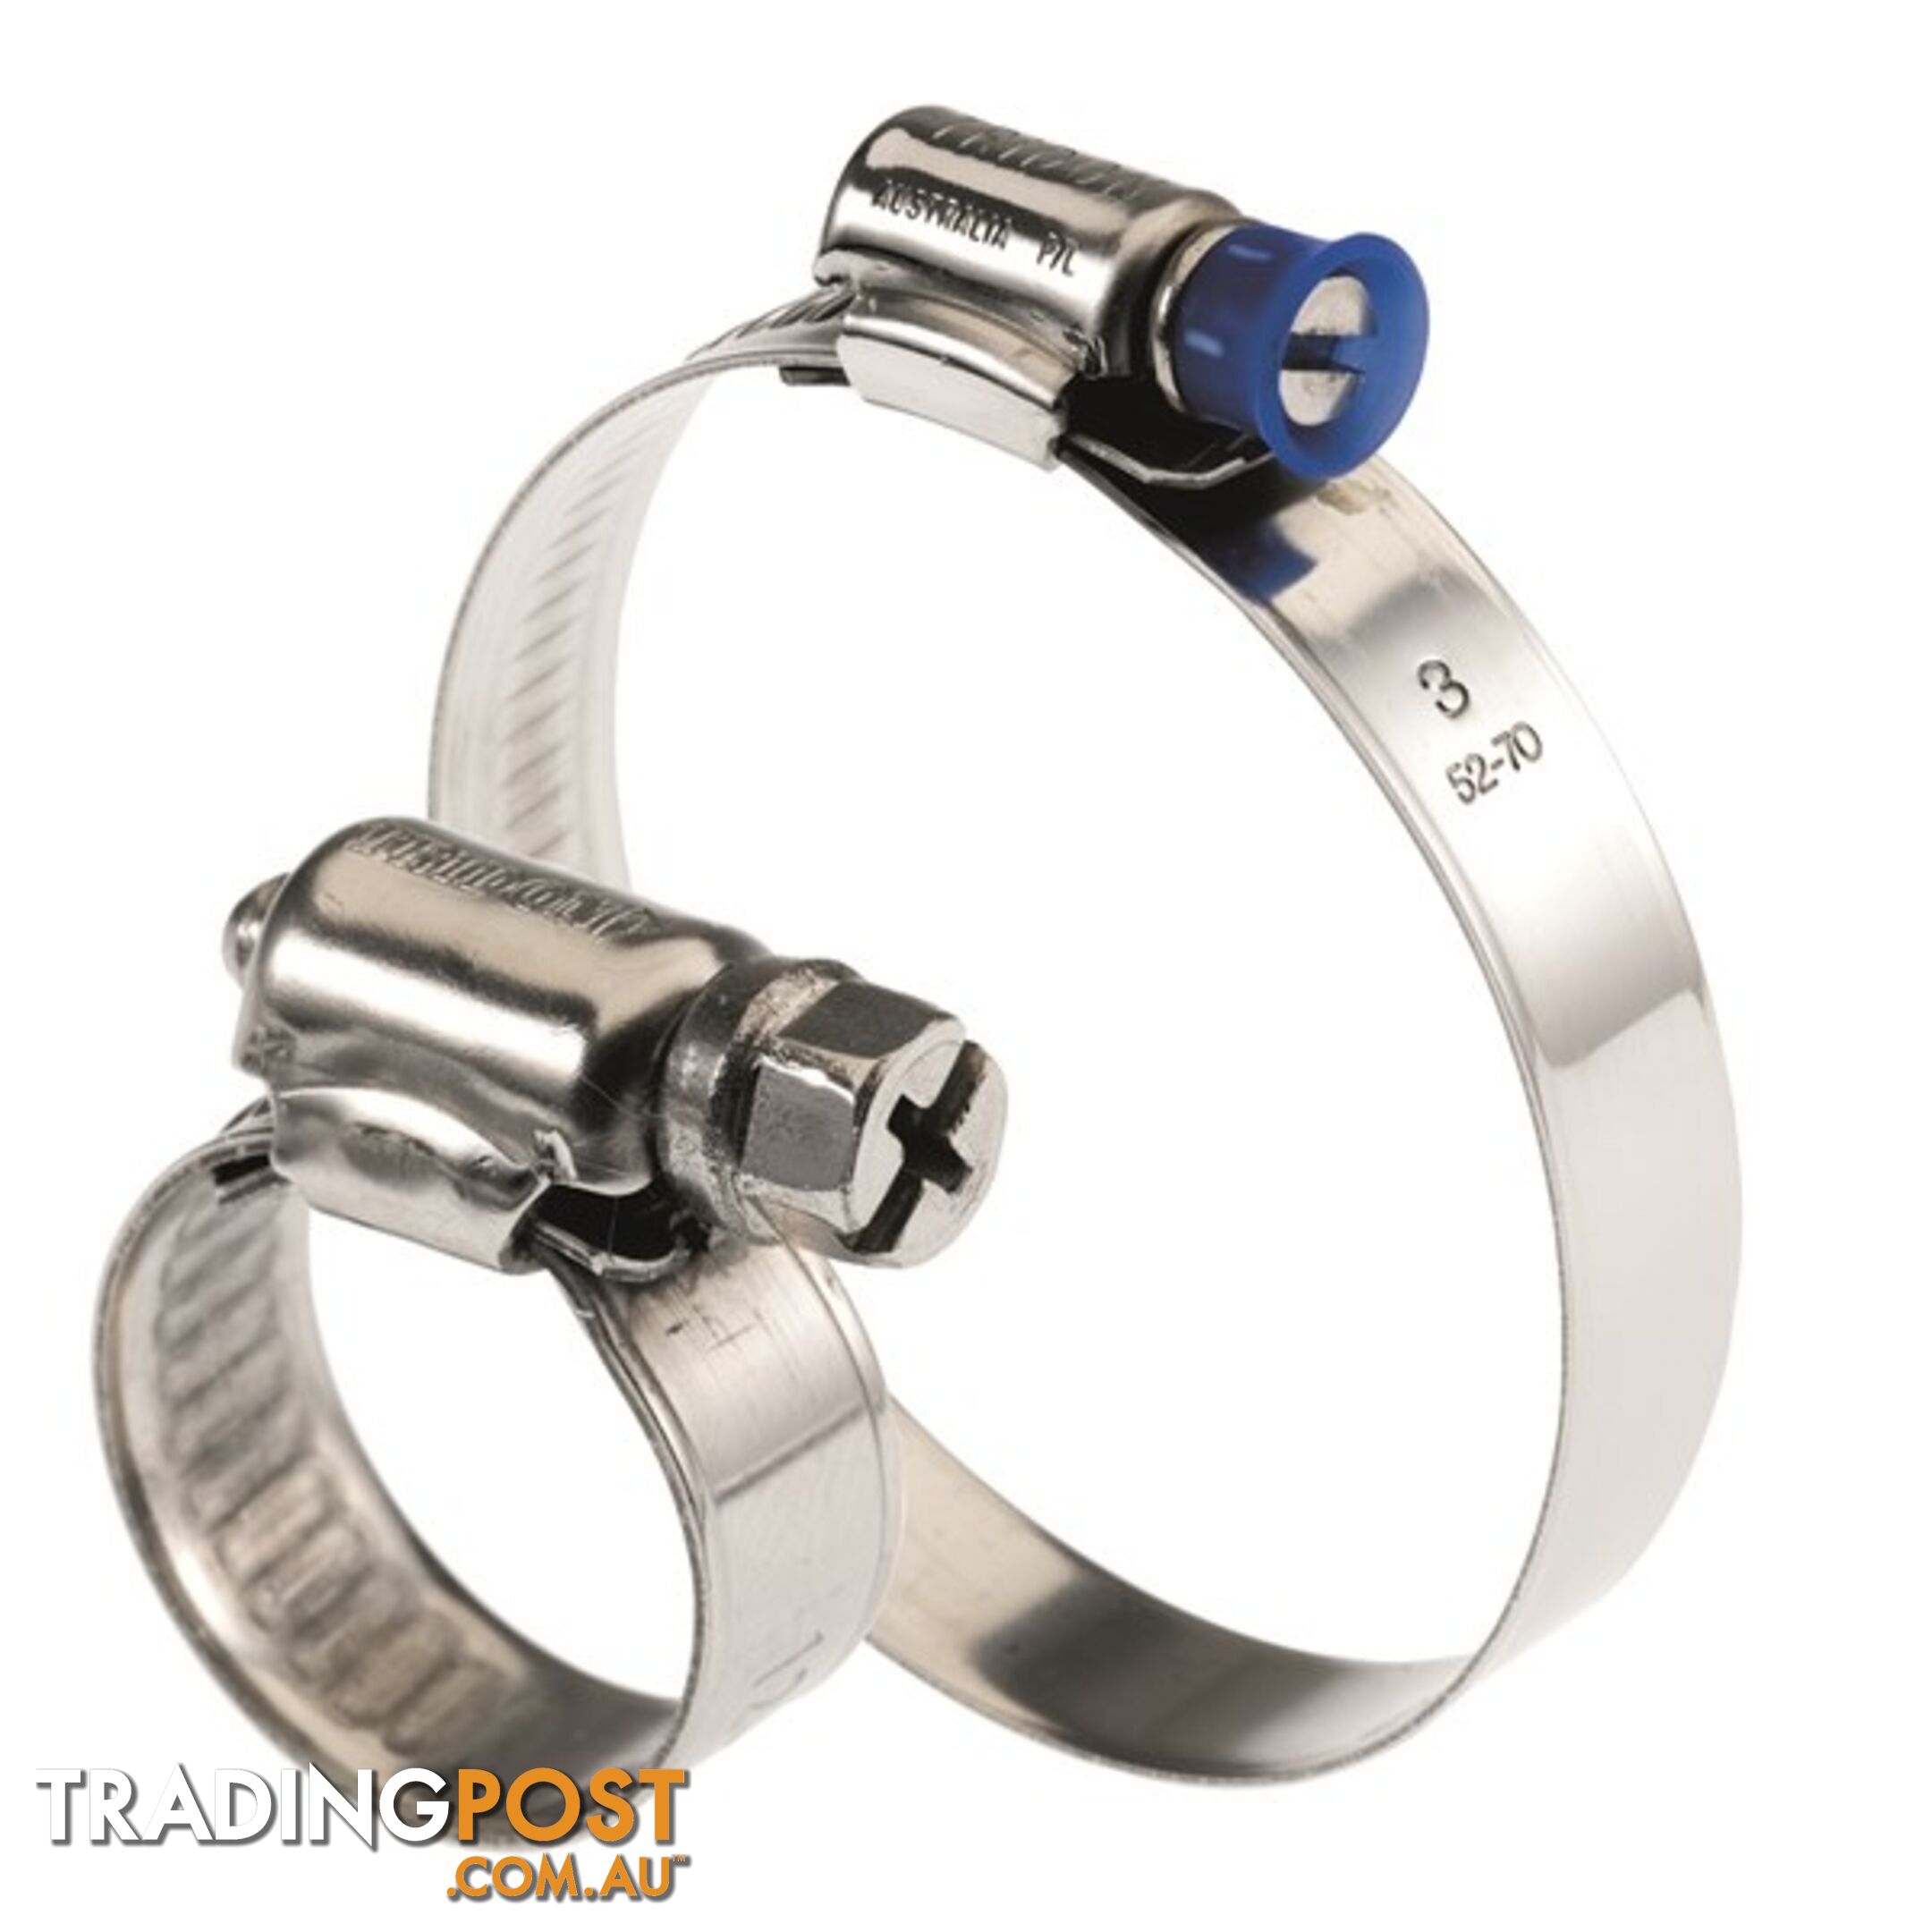 Tridon Hose Clamp 280 -305mm Regular Solid Band Collared Full S. Steel 10pk SKU - SMPC13